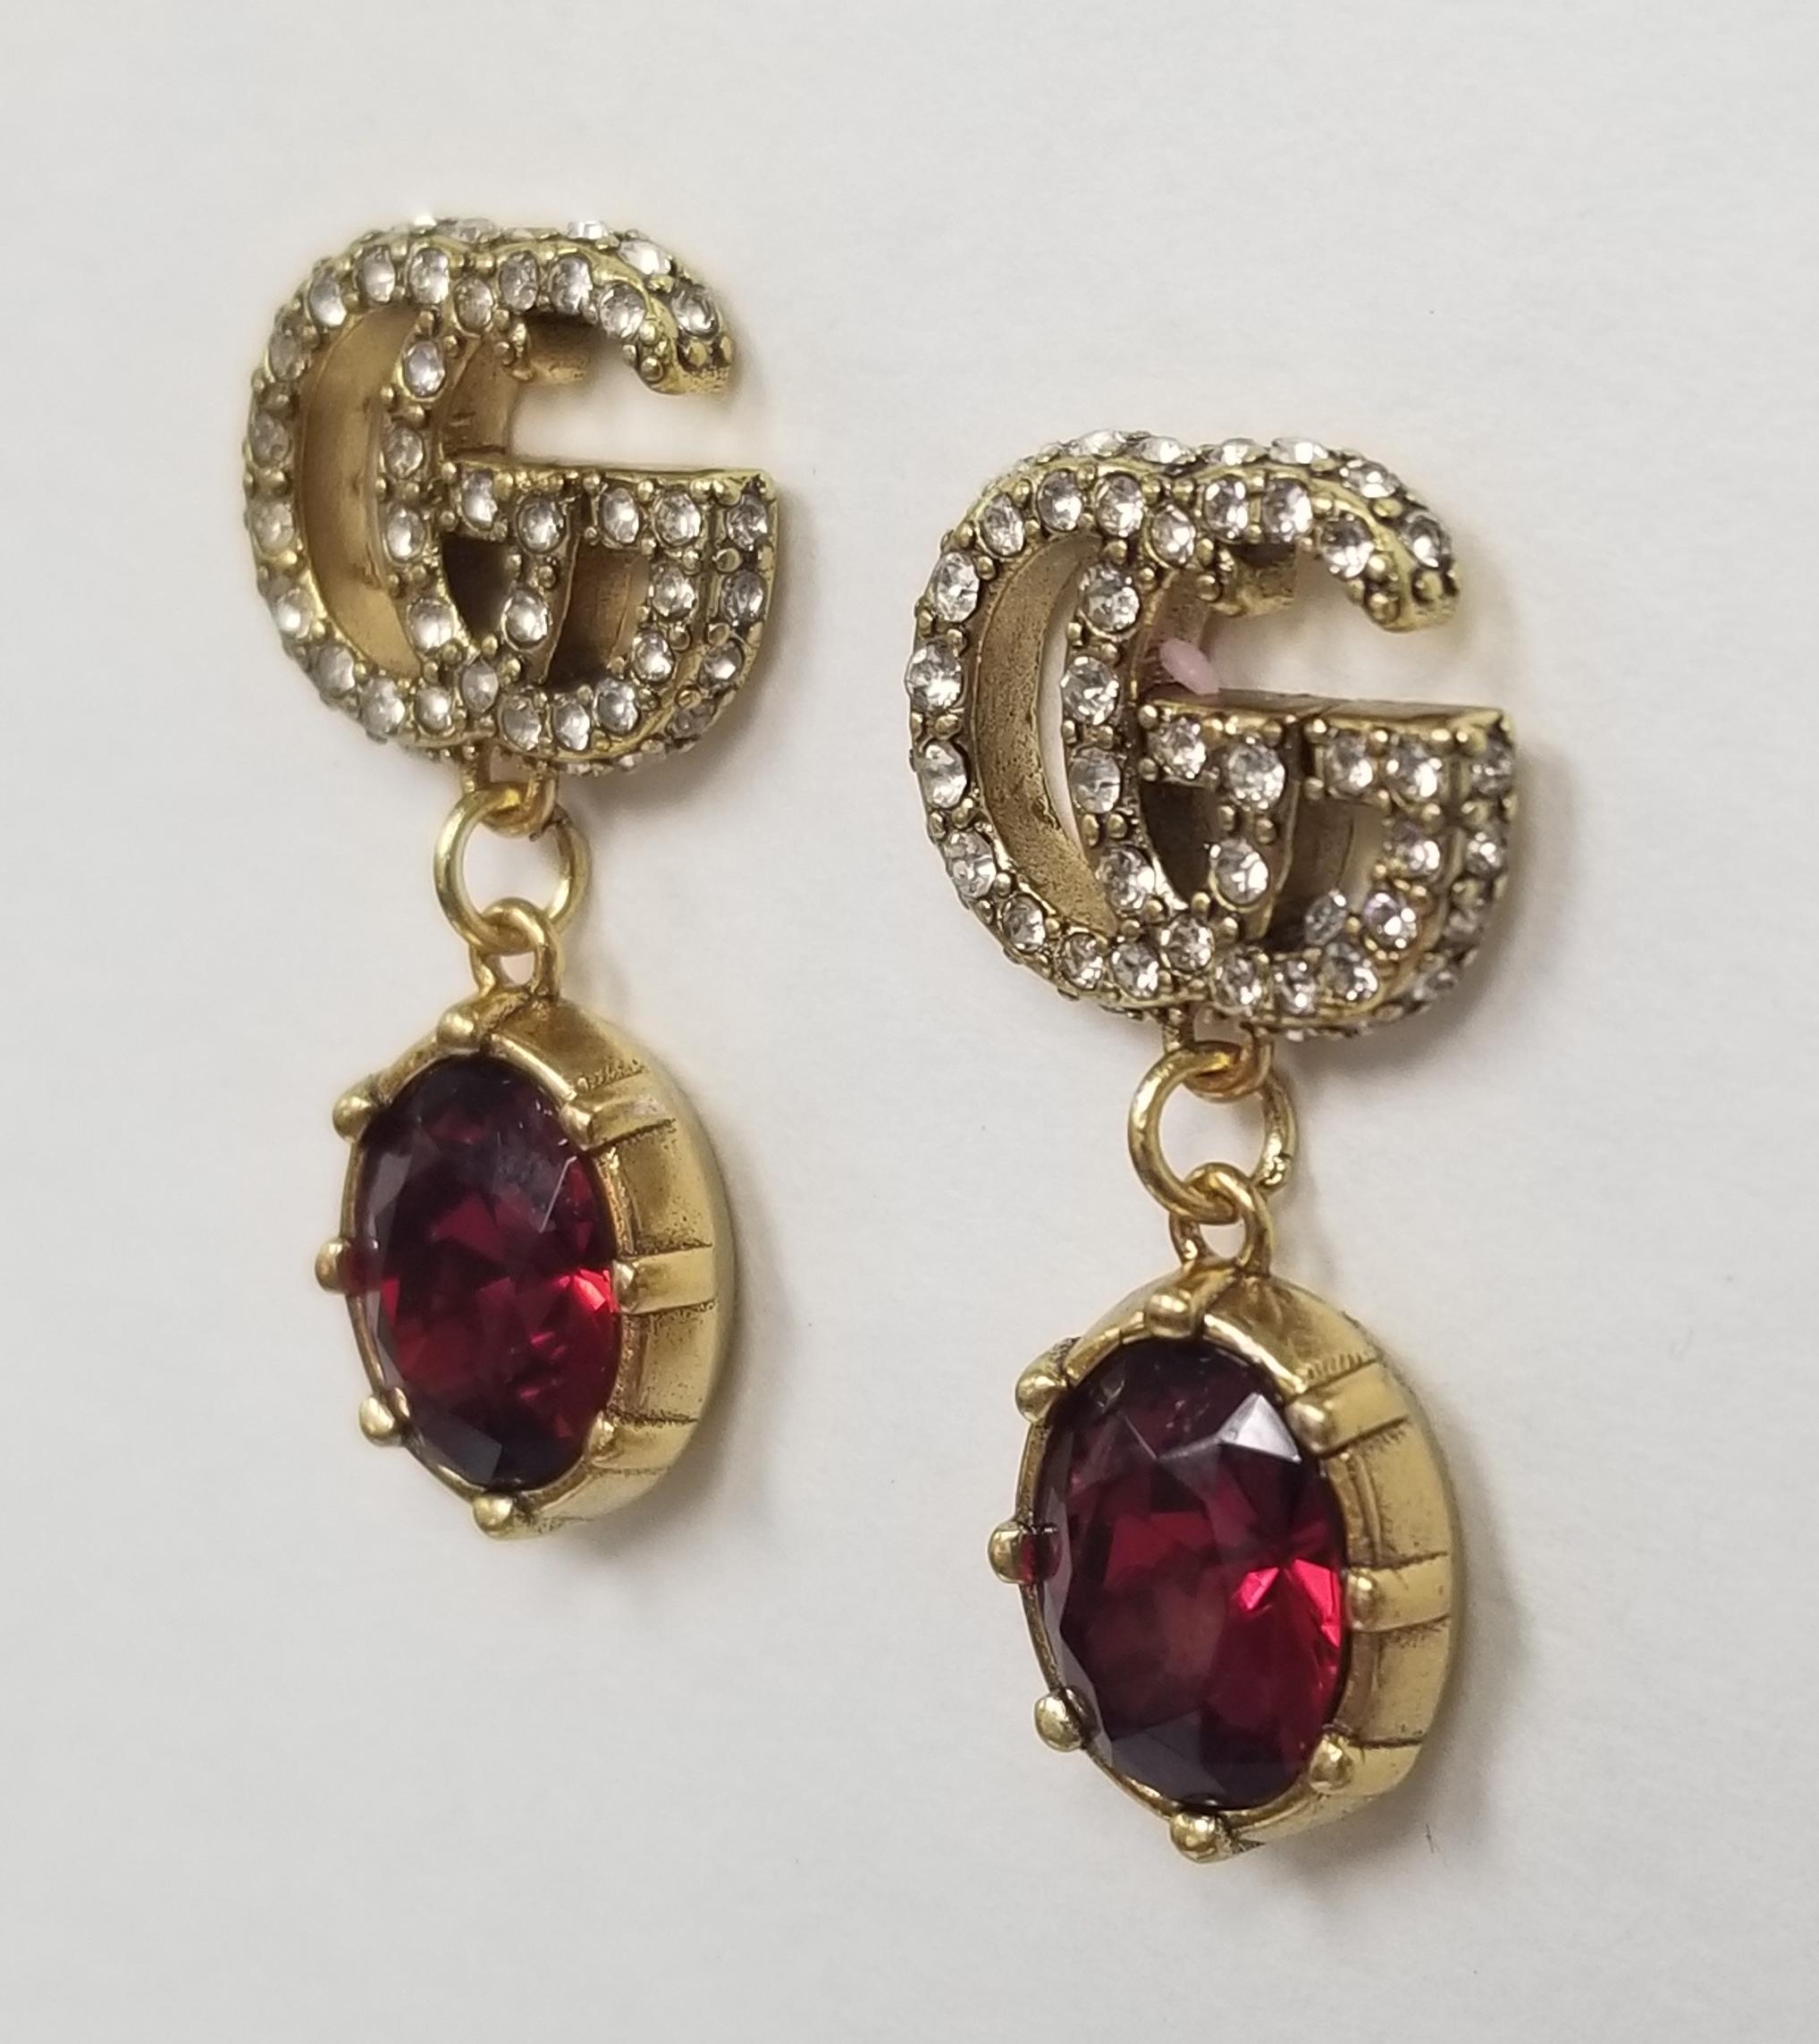  A red faceted crystal pendant combines with the crystal Double G detail, forming a sparkling pendant that completes these earrings in aged gold-toned metal.

    Metal with aged gold finish
    Crystal encrusted Double G detail
    Red crystal